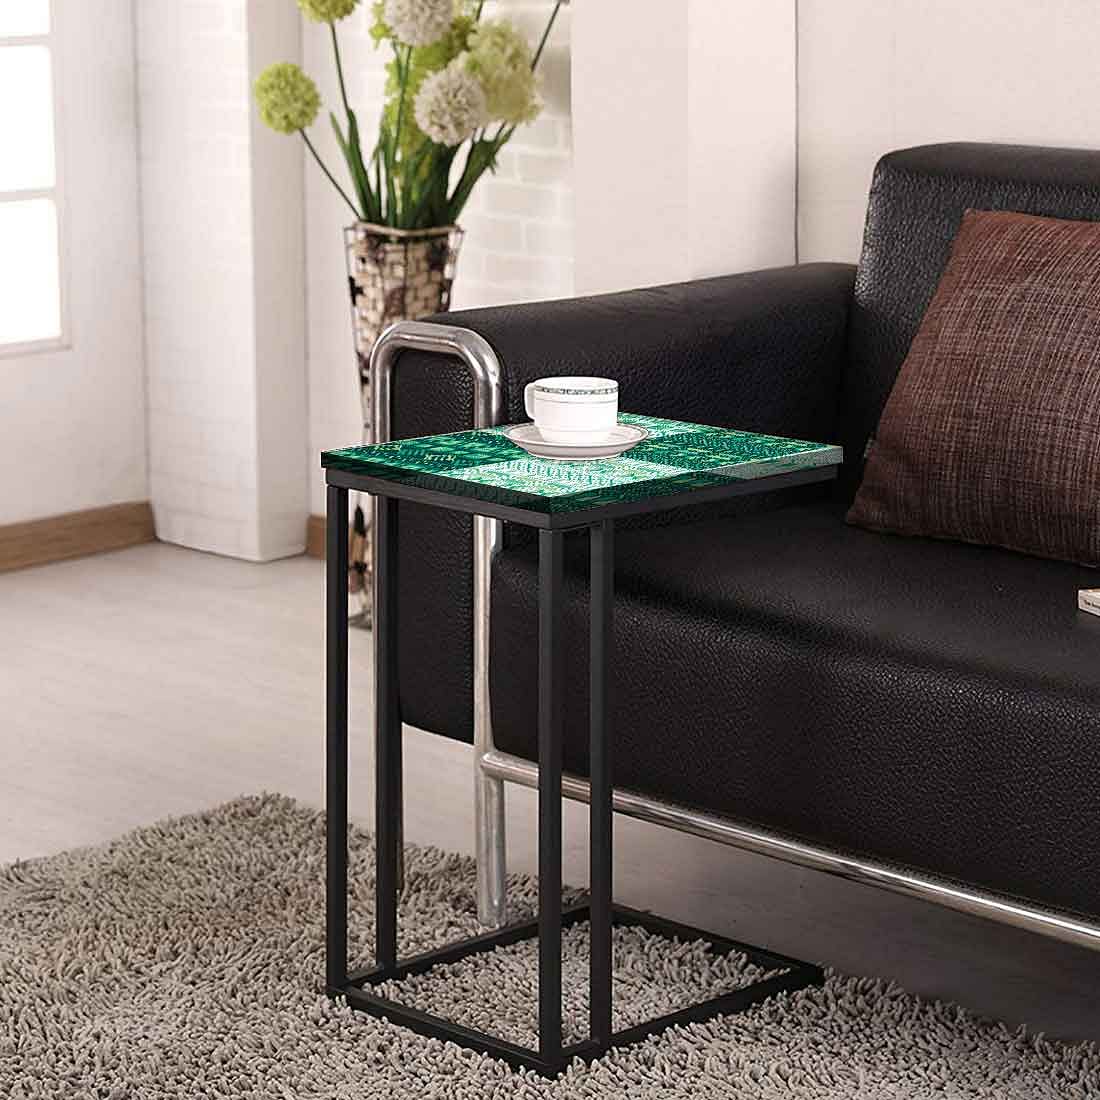 Small C Side Table For Sofa - Green Pattern Nutcase